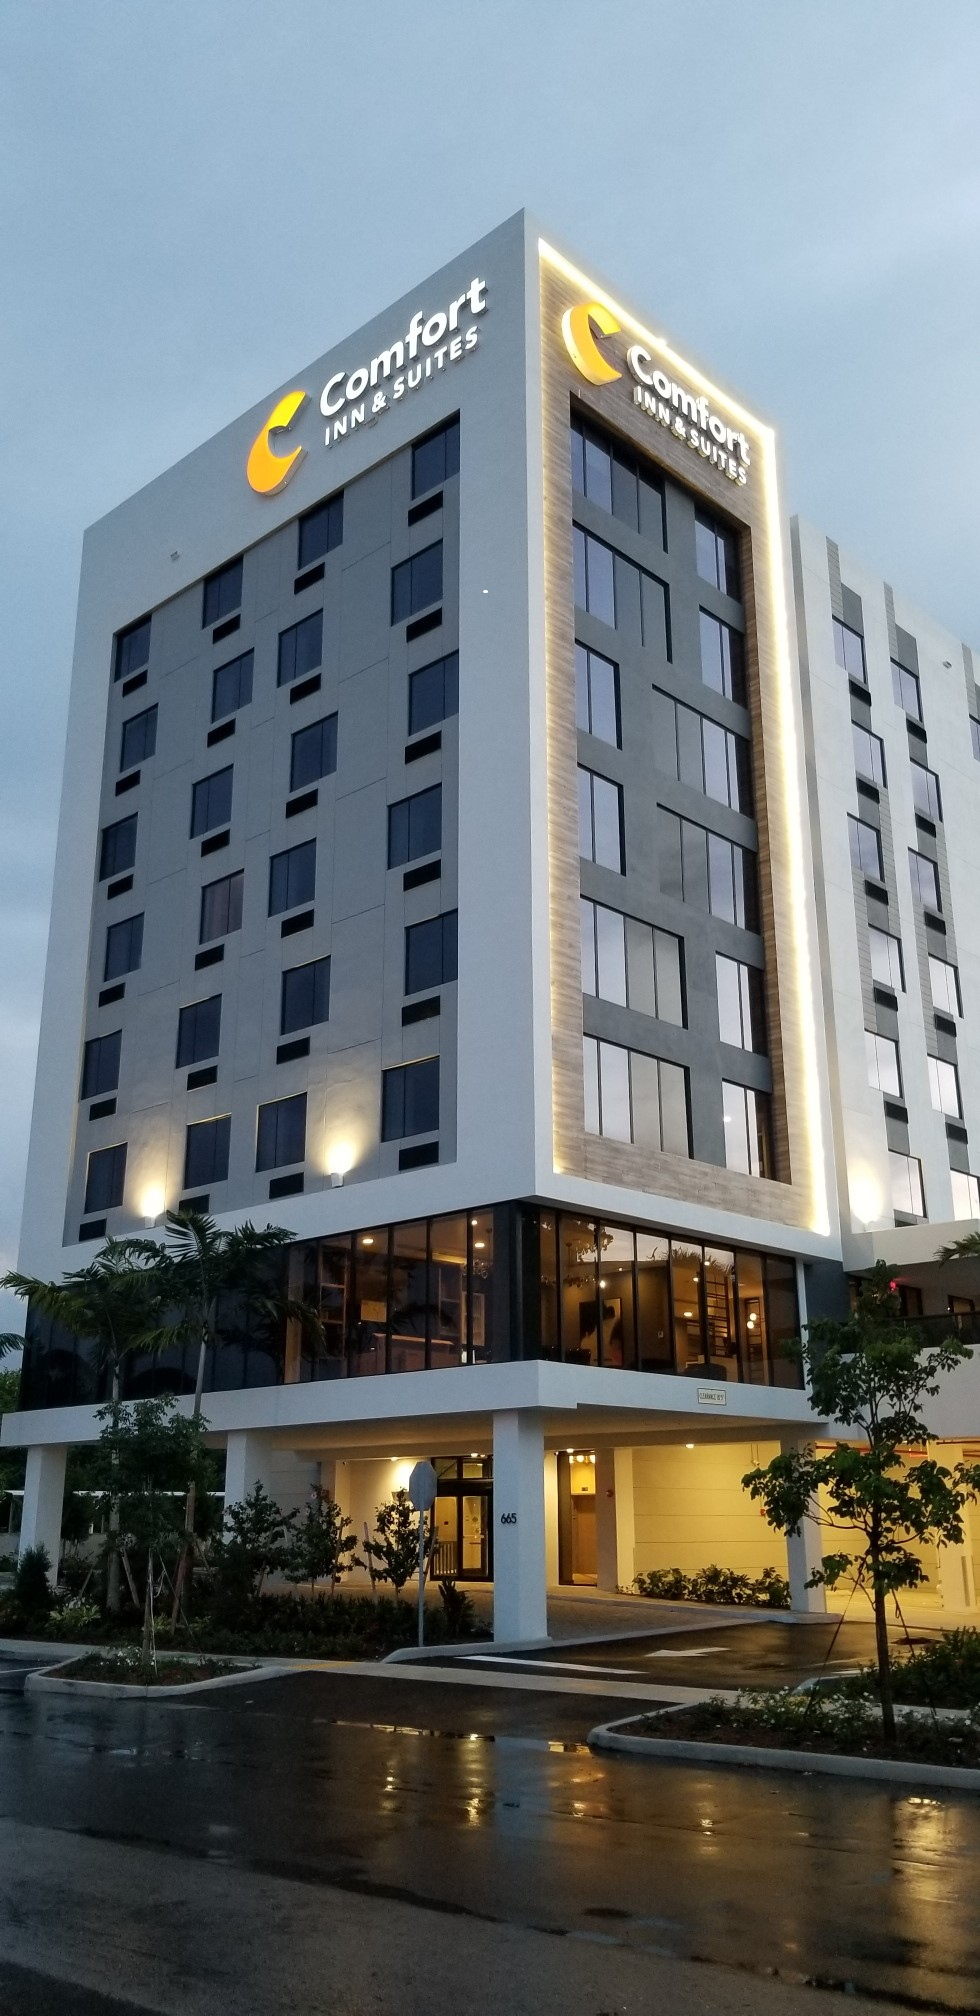 Travelers Hotel Group, Monday, October 28, 2019, Press release picture